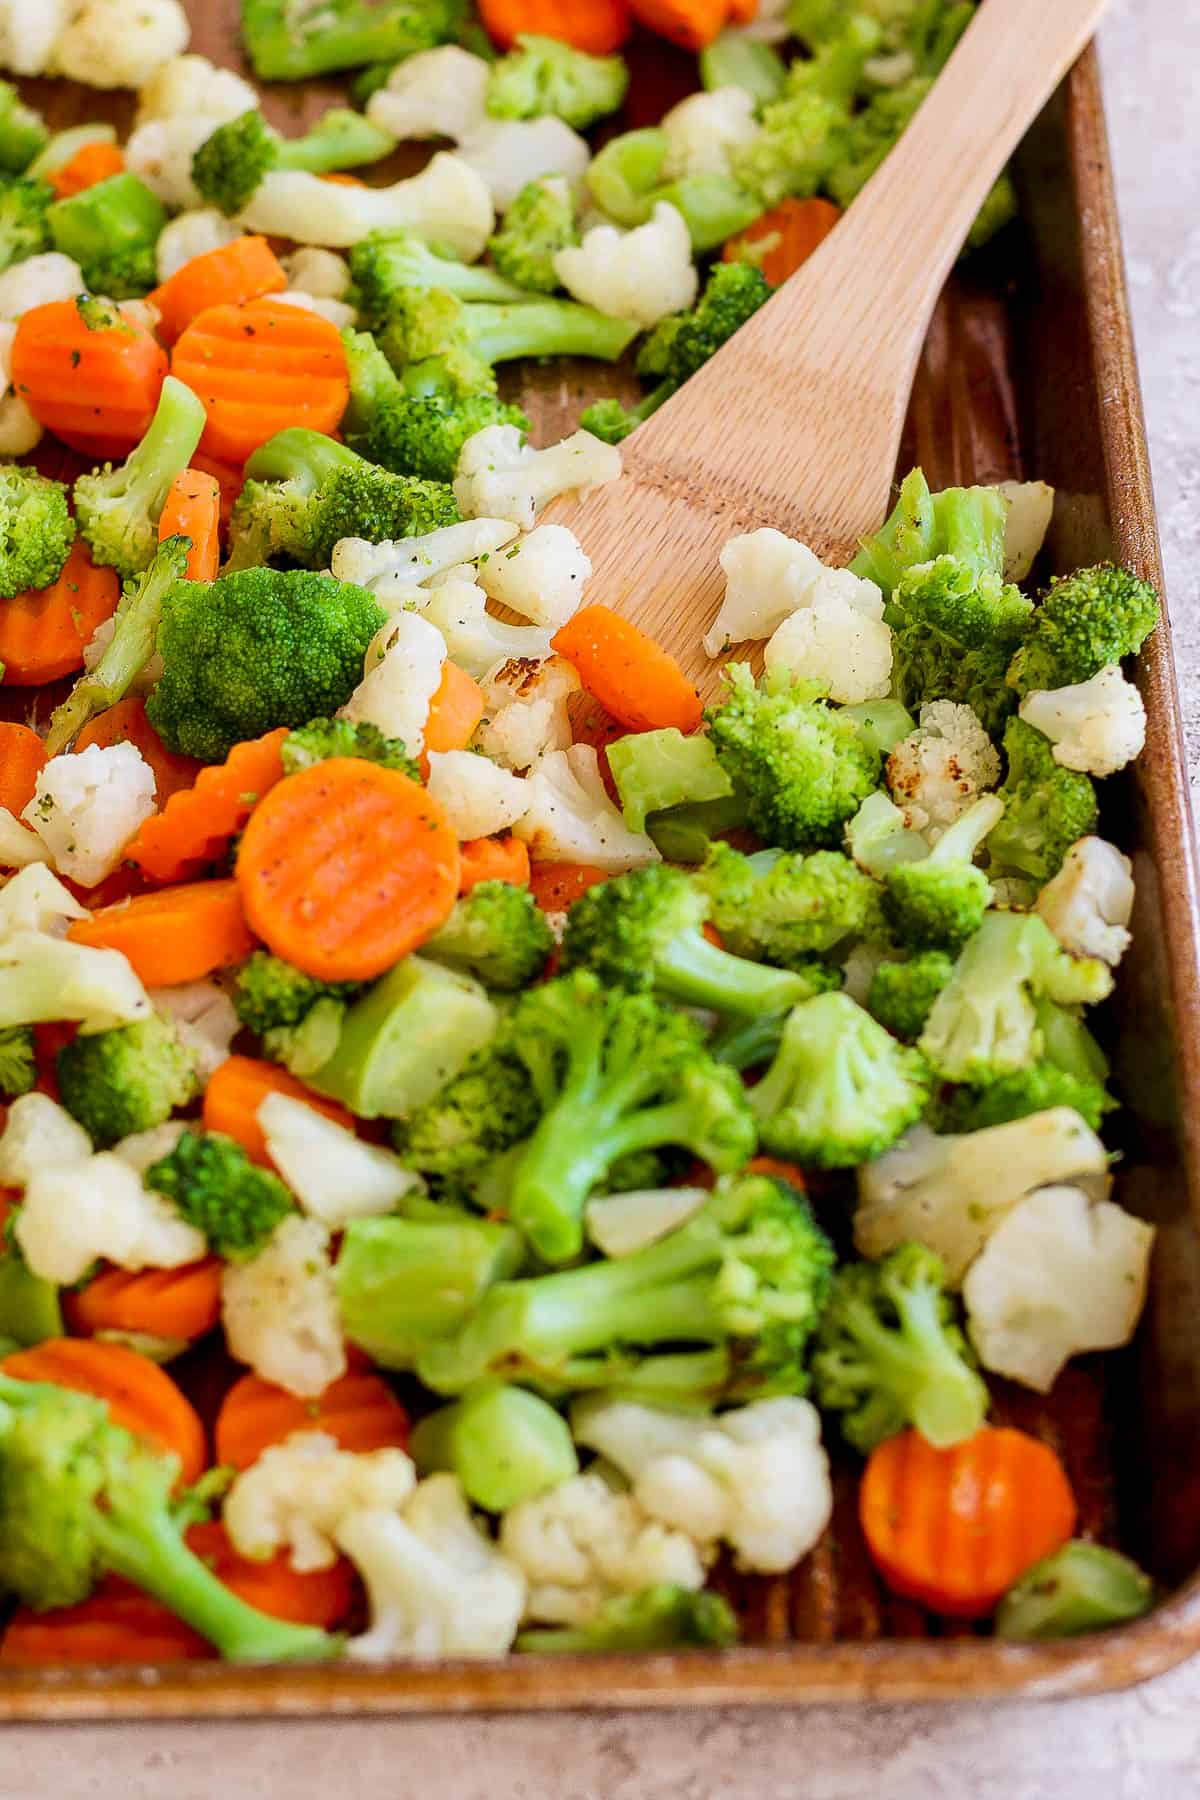 Roasted frozen veggies on a baking sheet with a wooden spoon.